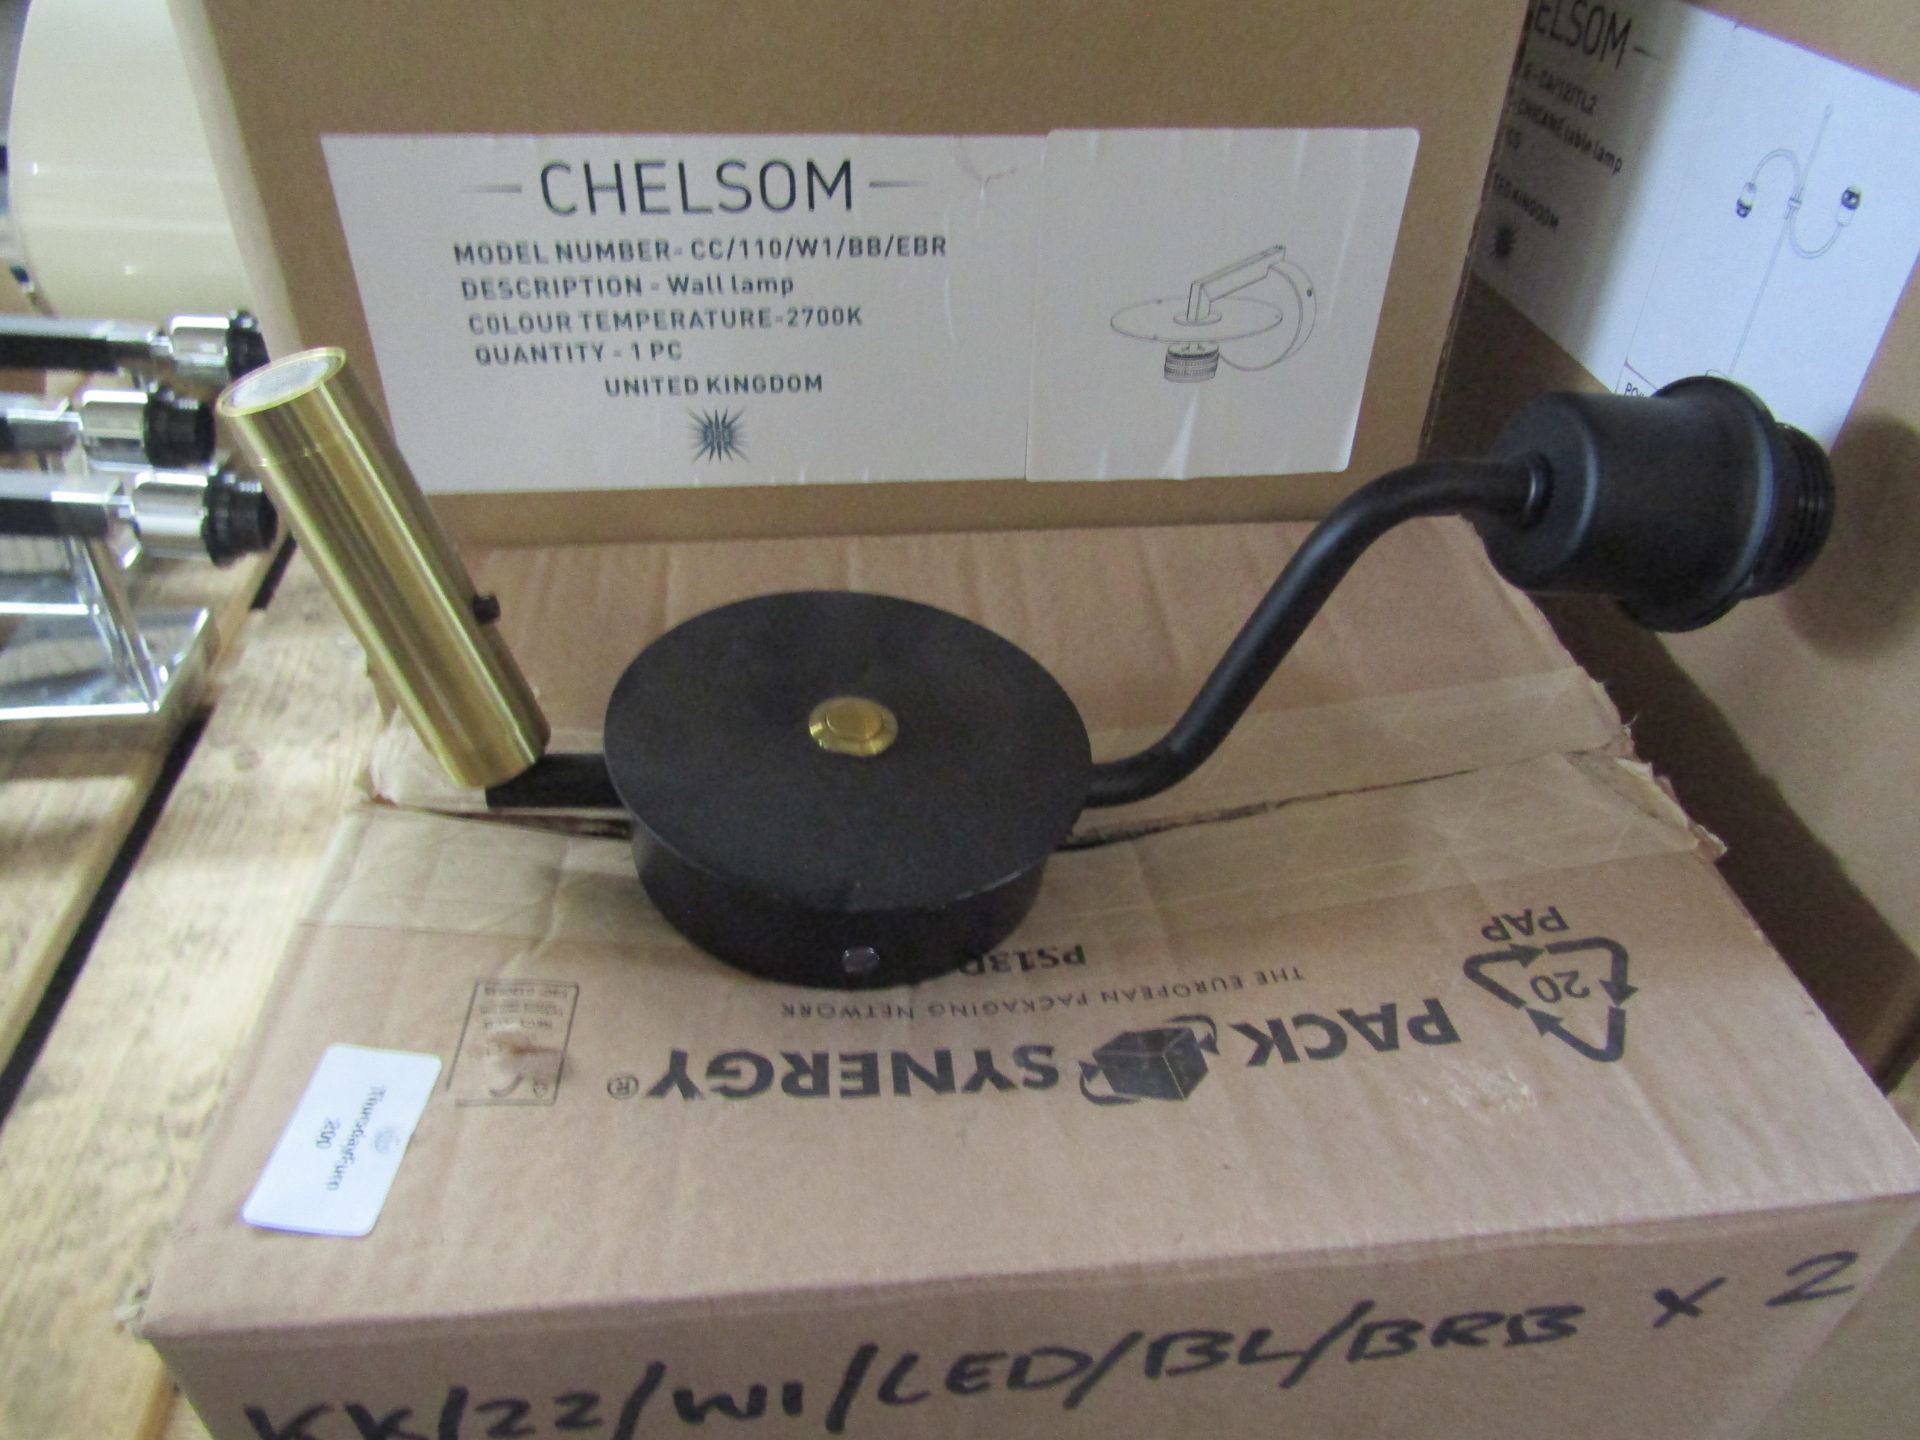 Chelsom - Brass & Black Wall Light With LED Reading Light - Good Condition.